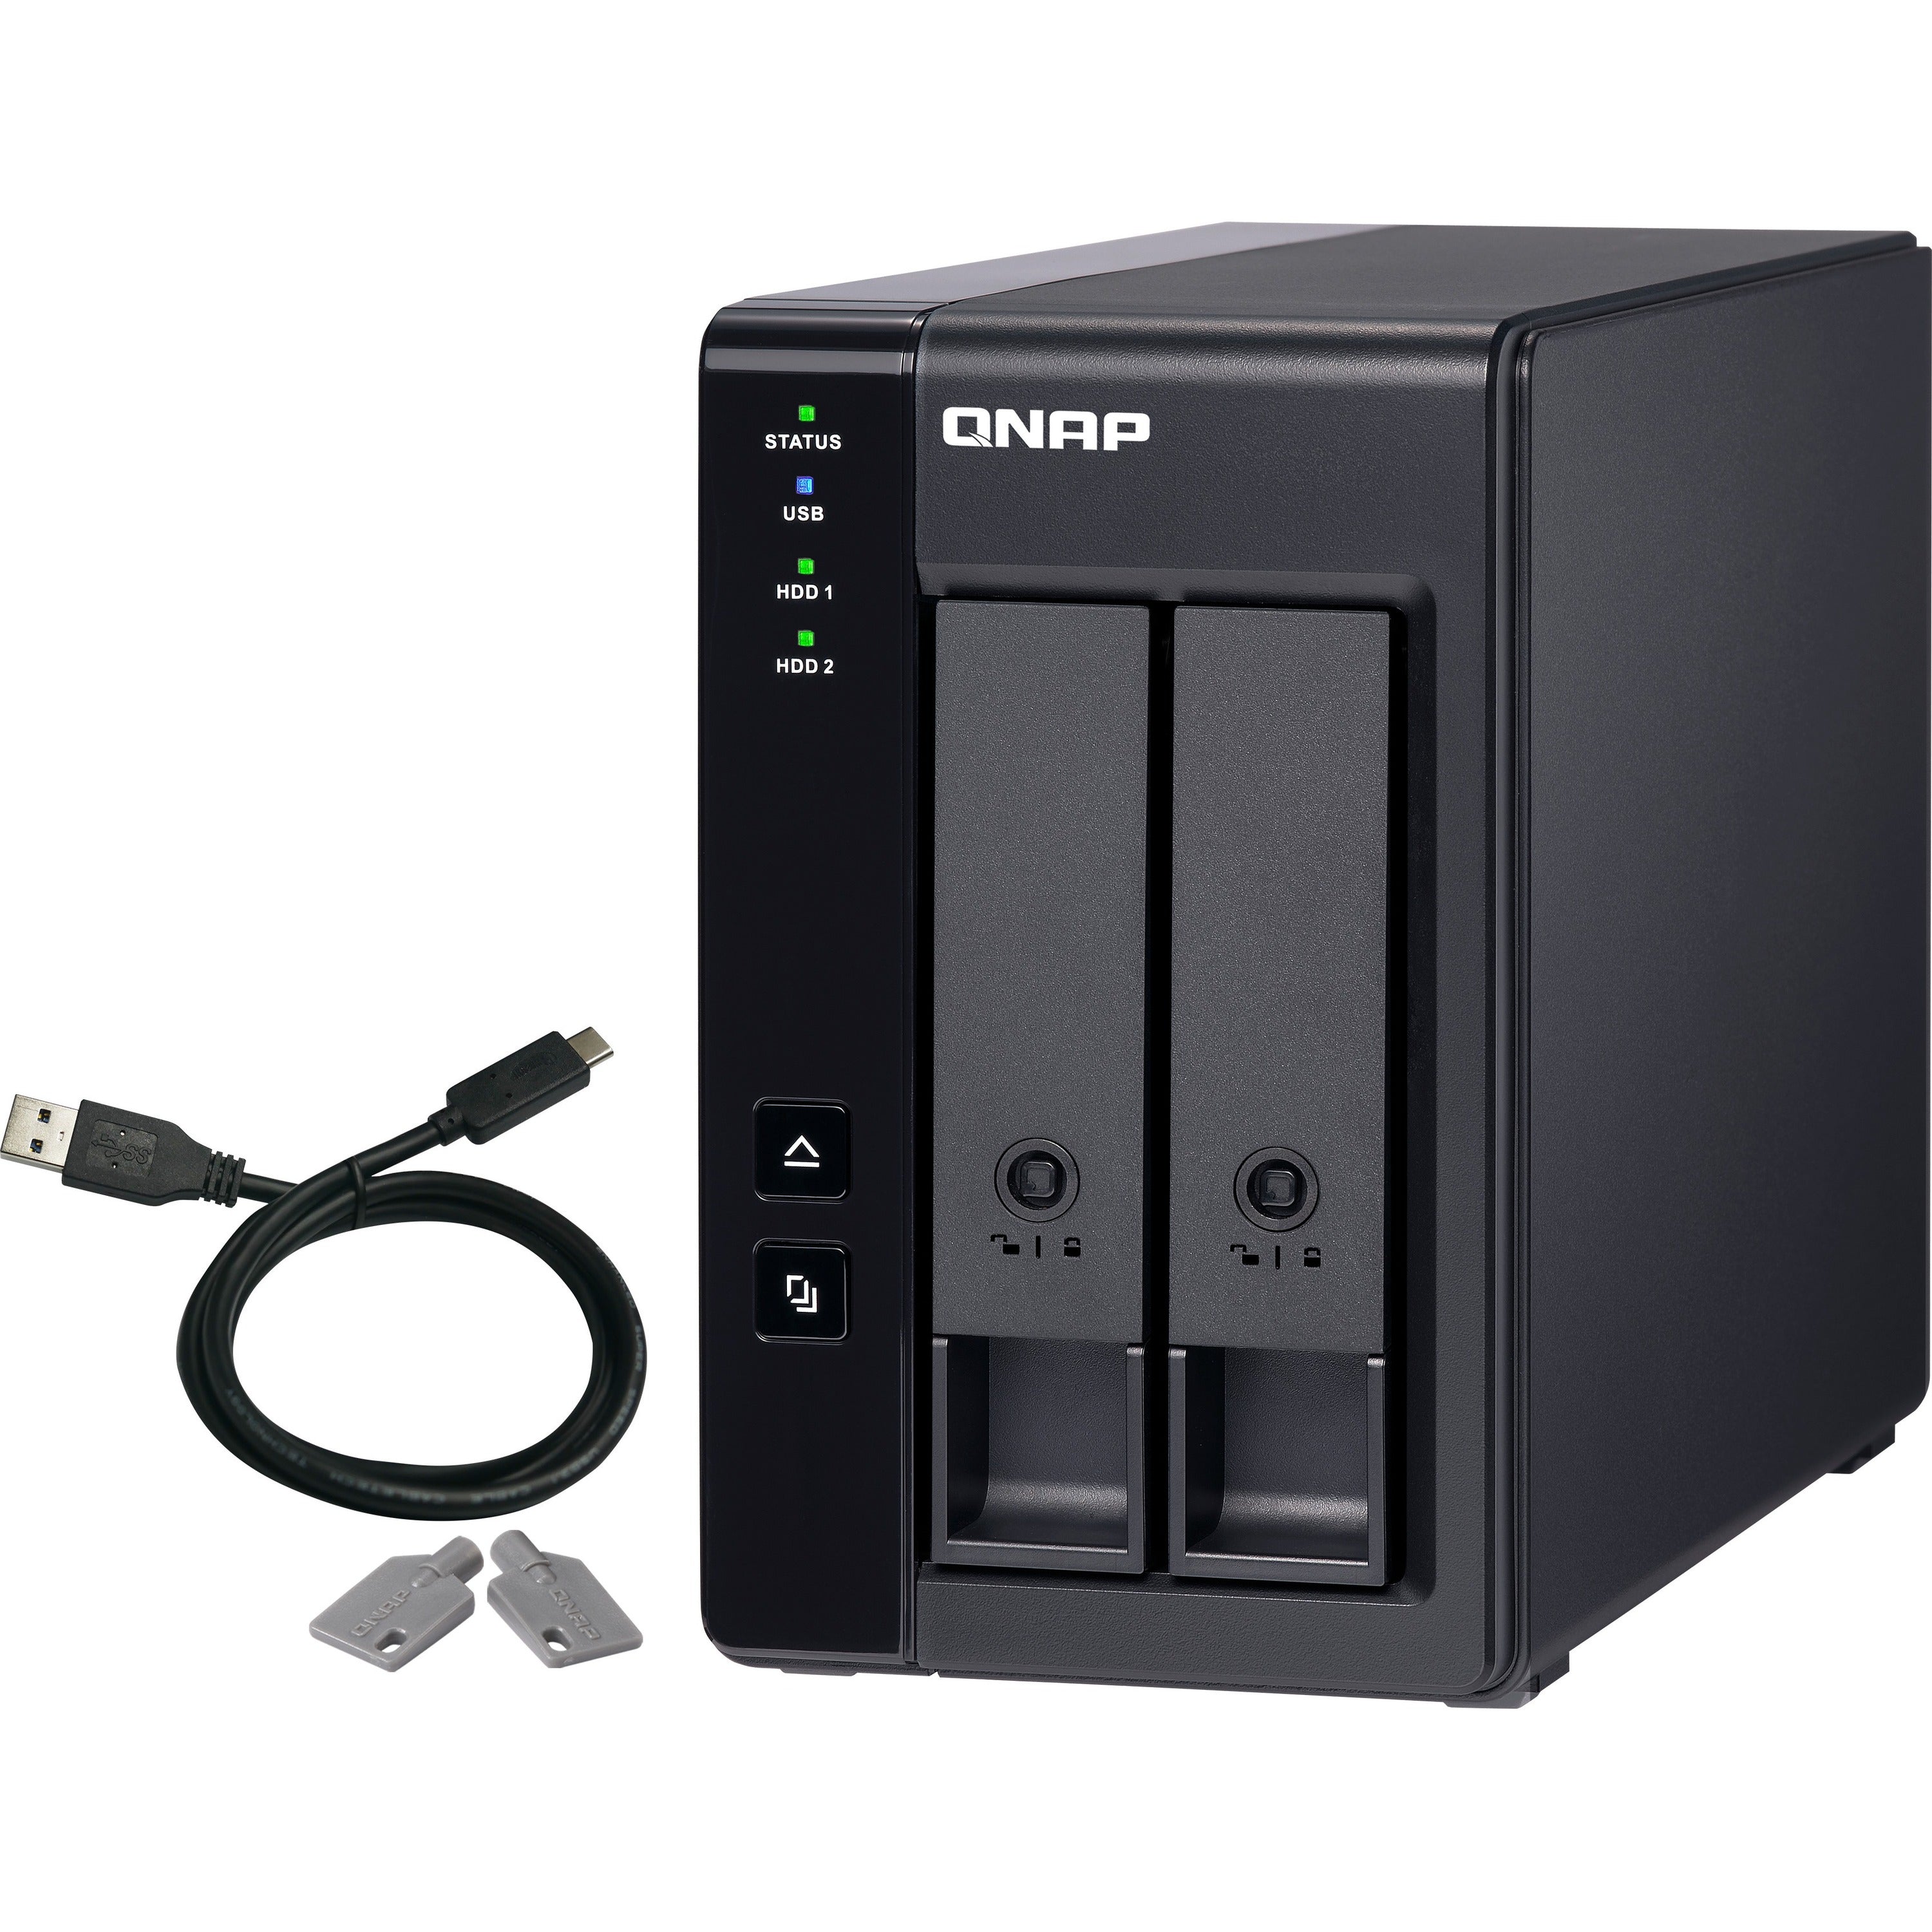 QNAP 2 Bay USB Type-C Direct Attached Storage with Hardware RAID - TR-002-US